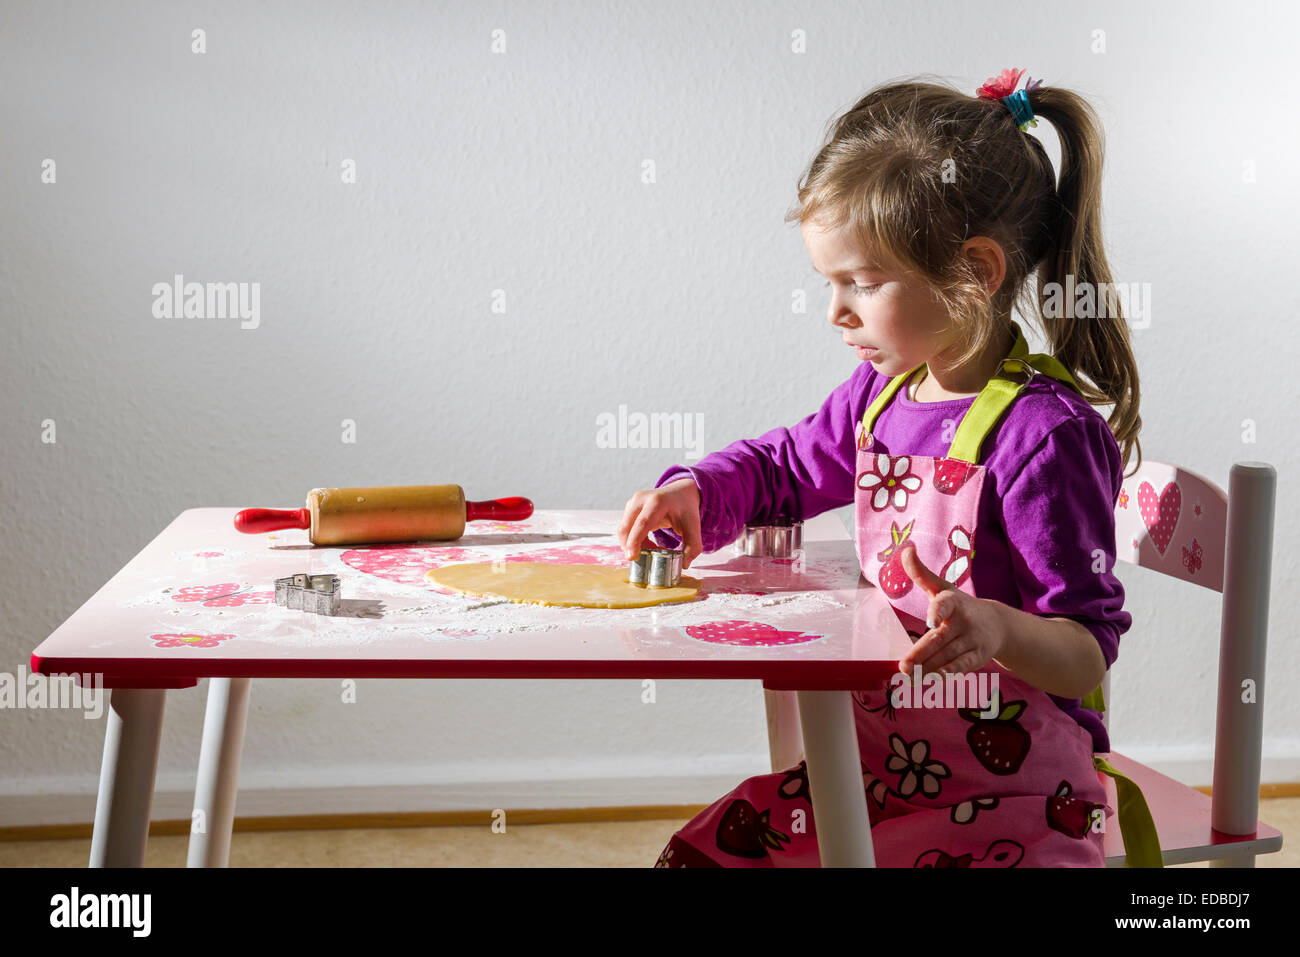 Fille, 3 ans, baking Christmas Cookies Banque D'Images